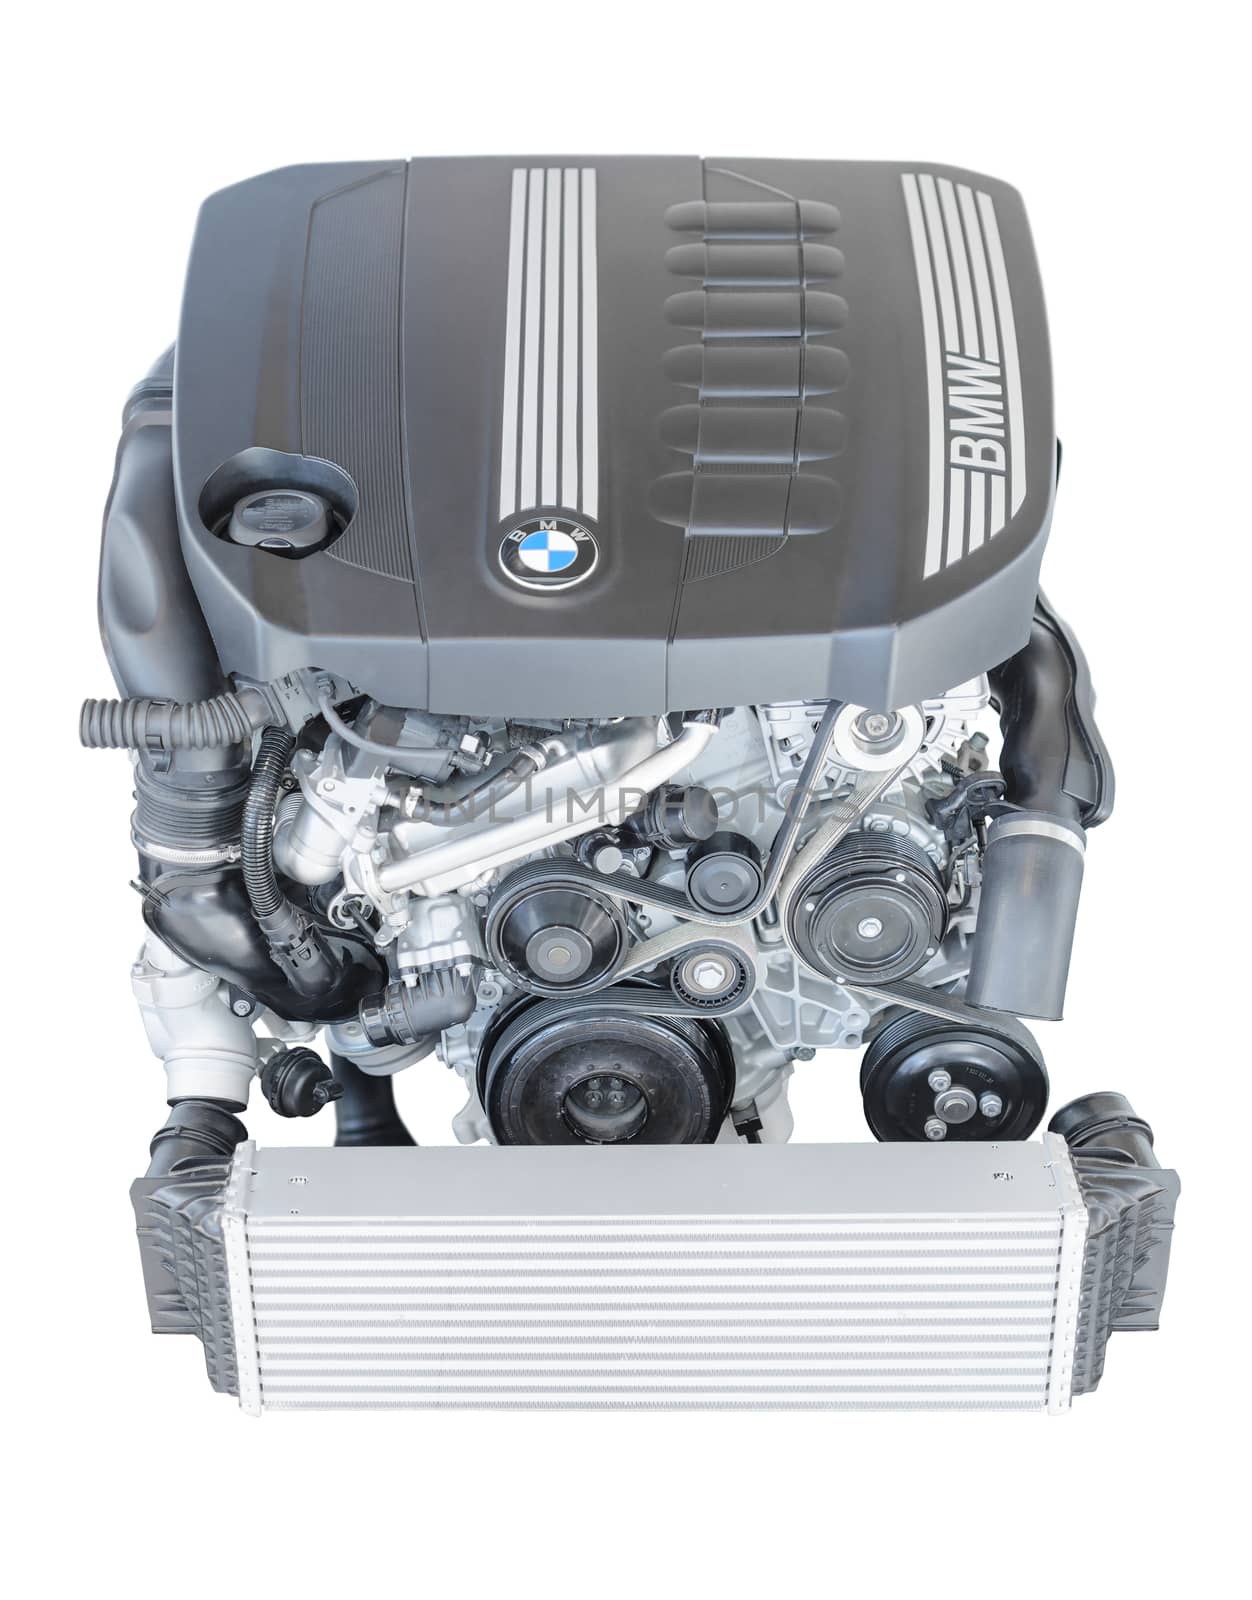 Isolated modern powerful flagship model of BMW TwinPower turbo diesel engine by servickuz